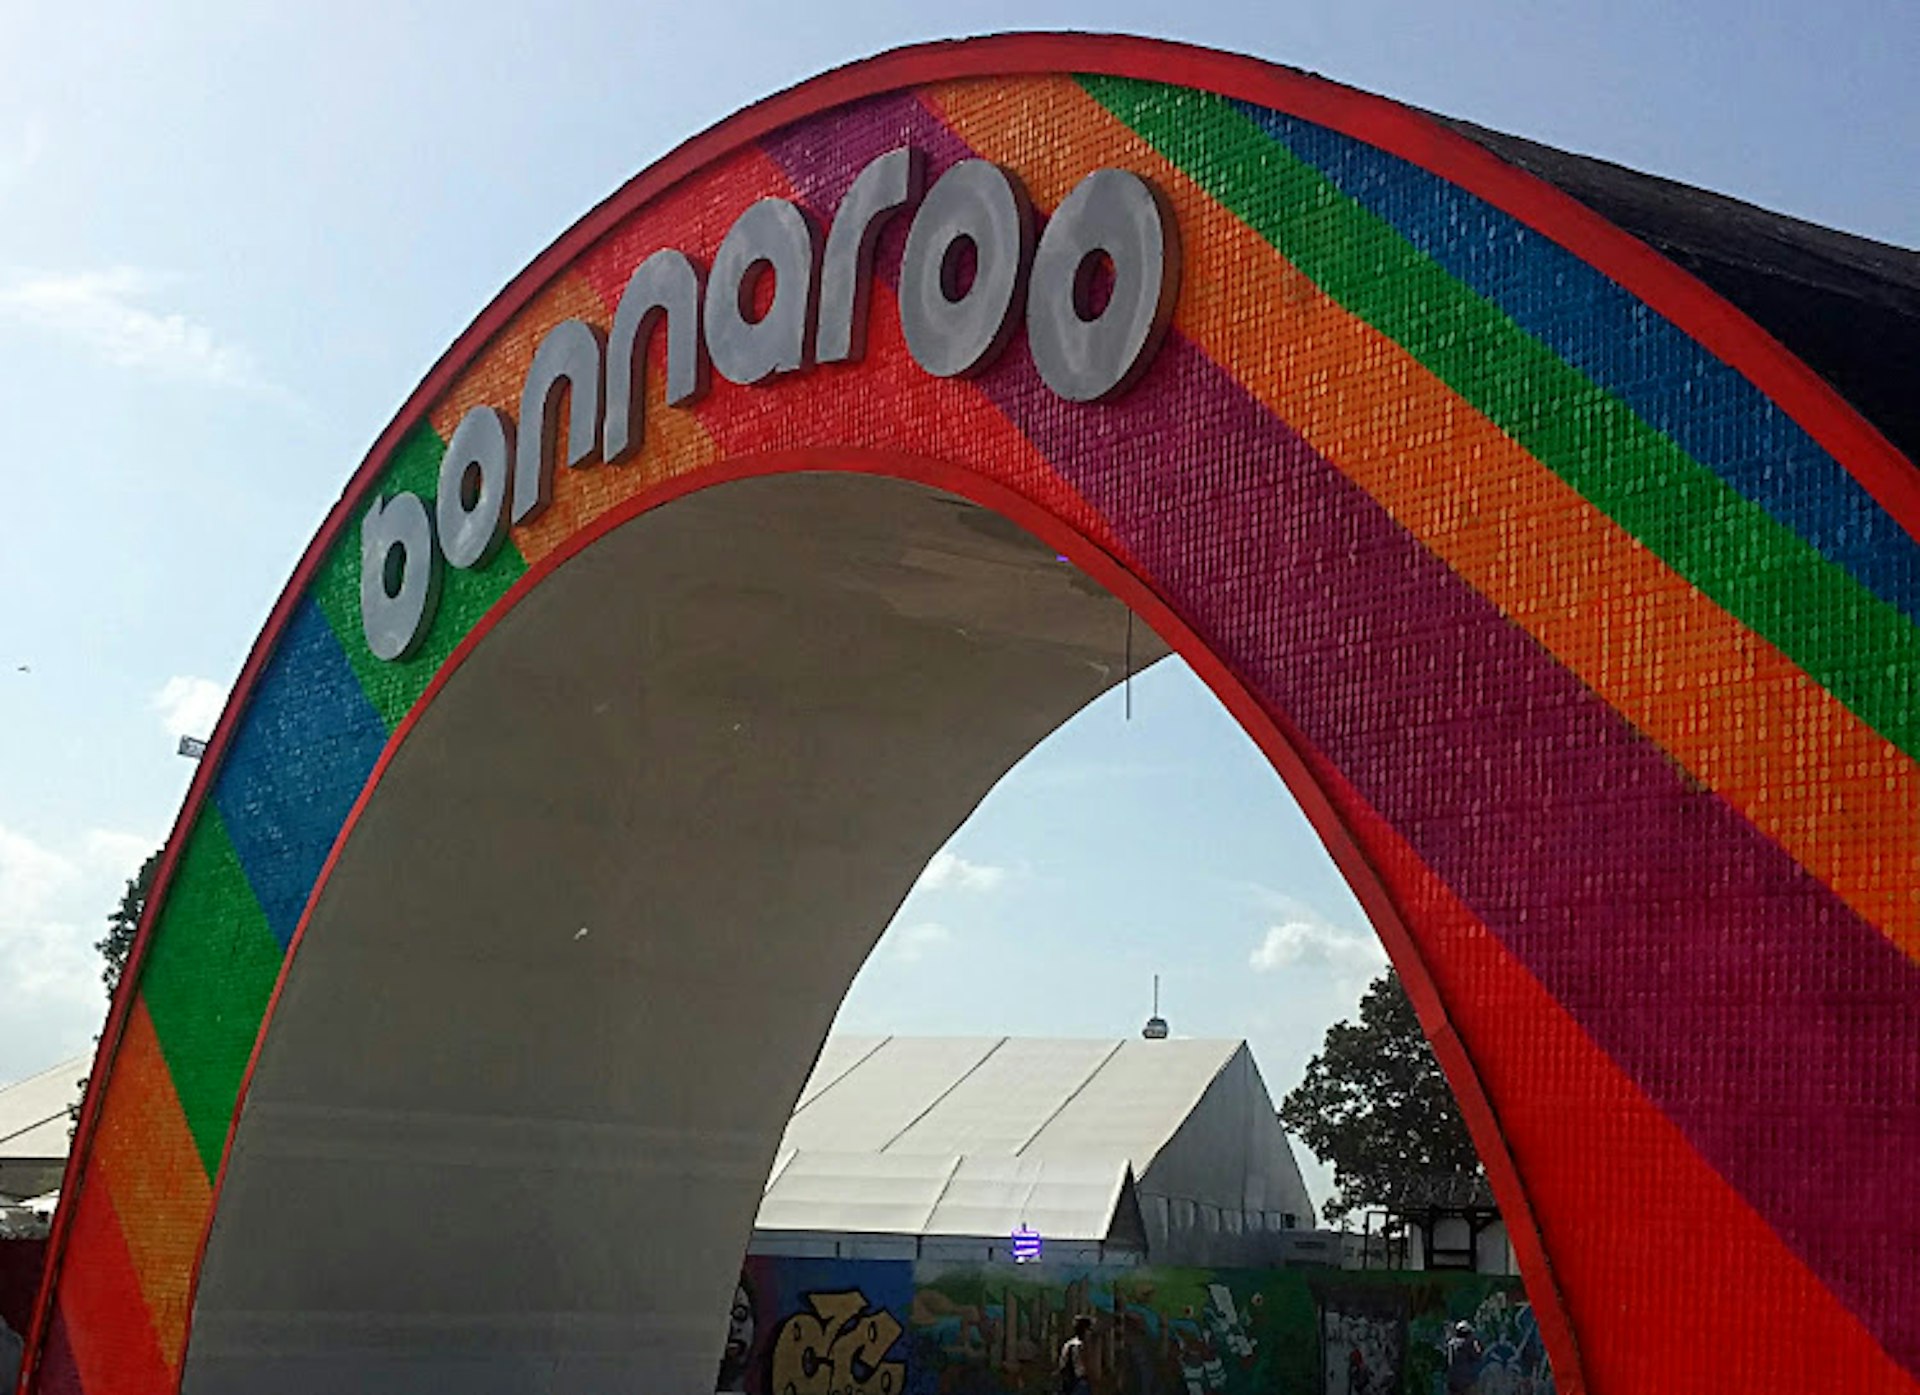 Bonnaroo is one of the US' biggest and most popular festivals, held every year in Middle Tennessee. Image by Alexander Howard/Lonely Planet